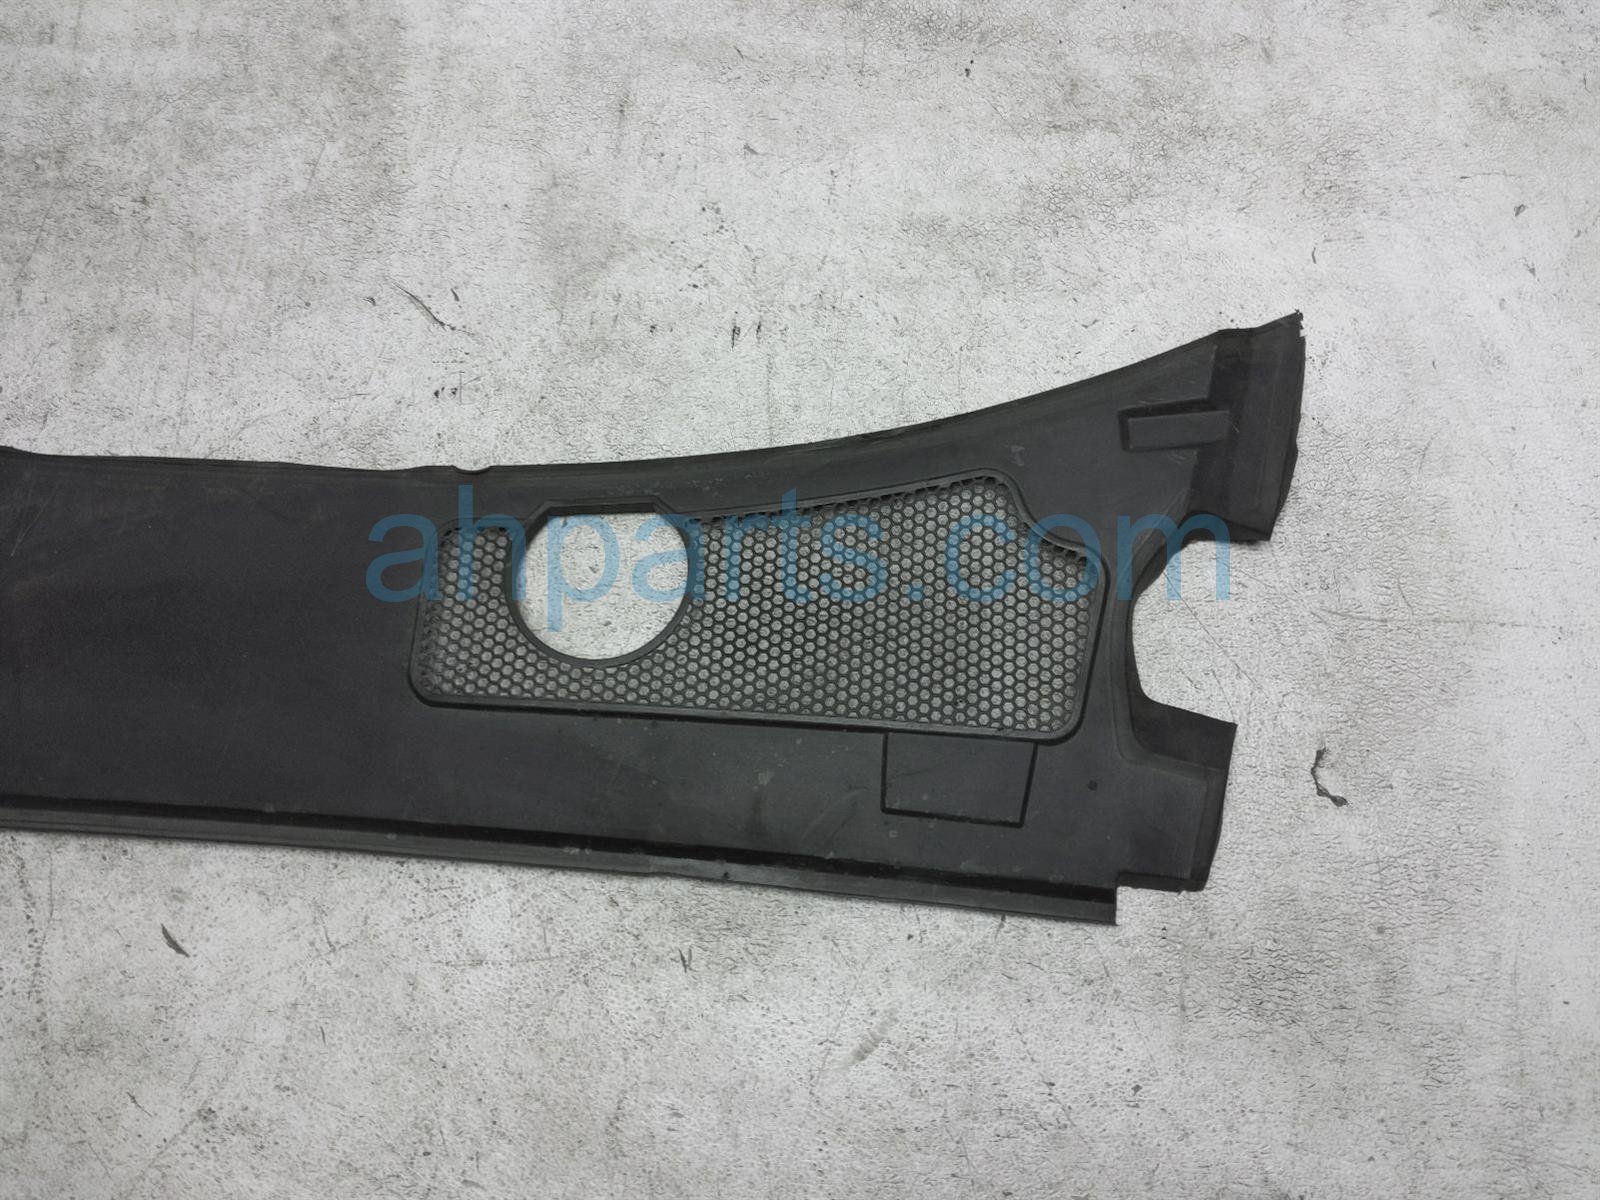 Sold 2011 Audi A6 Audi Windshield Cover Cowl Grille 4F1-819-447-A-01C,